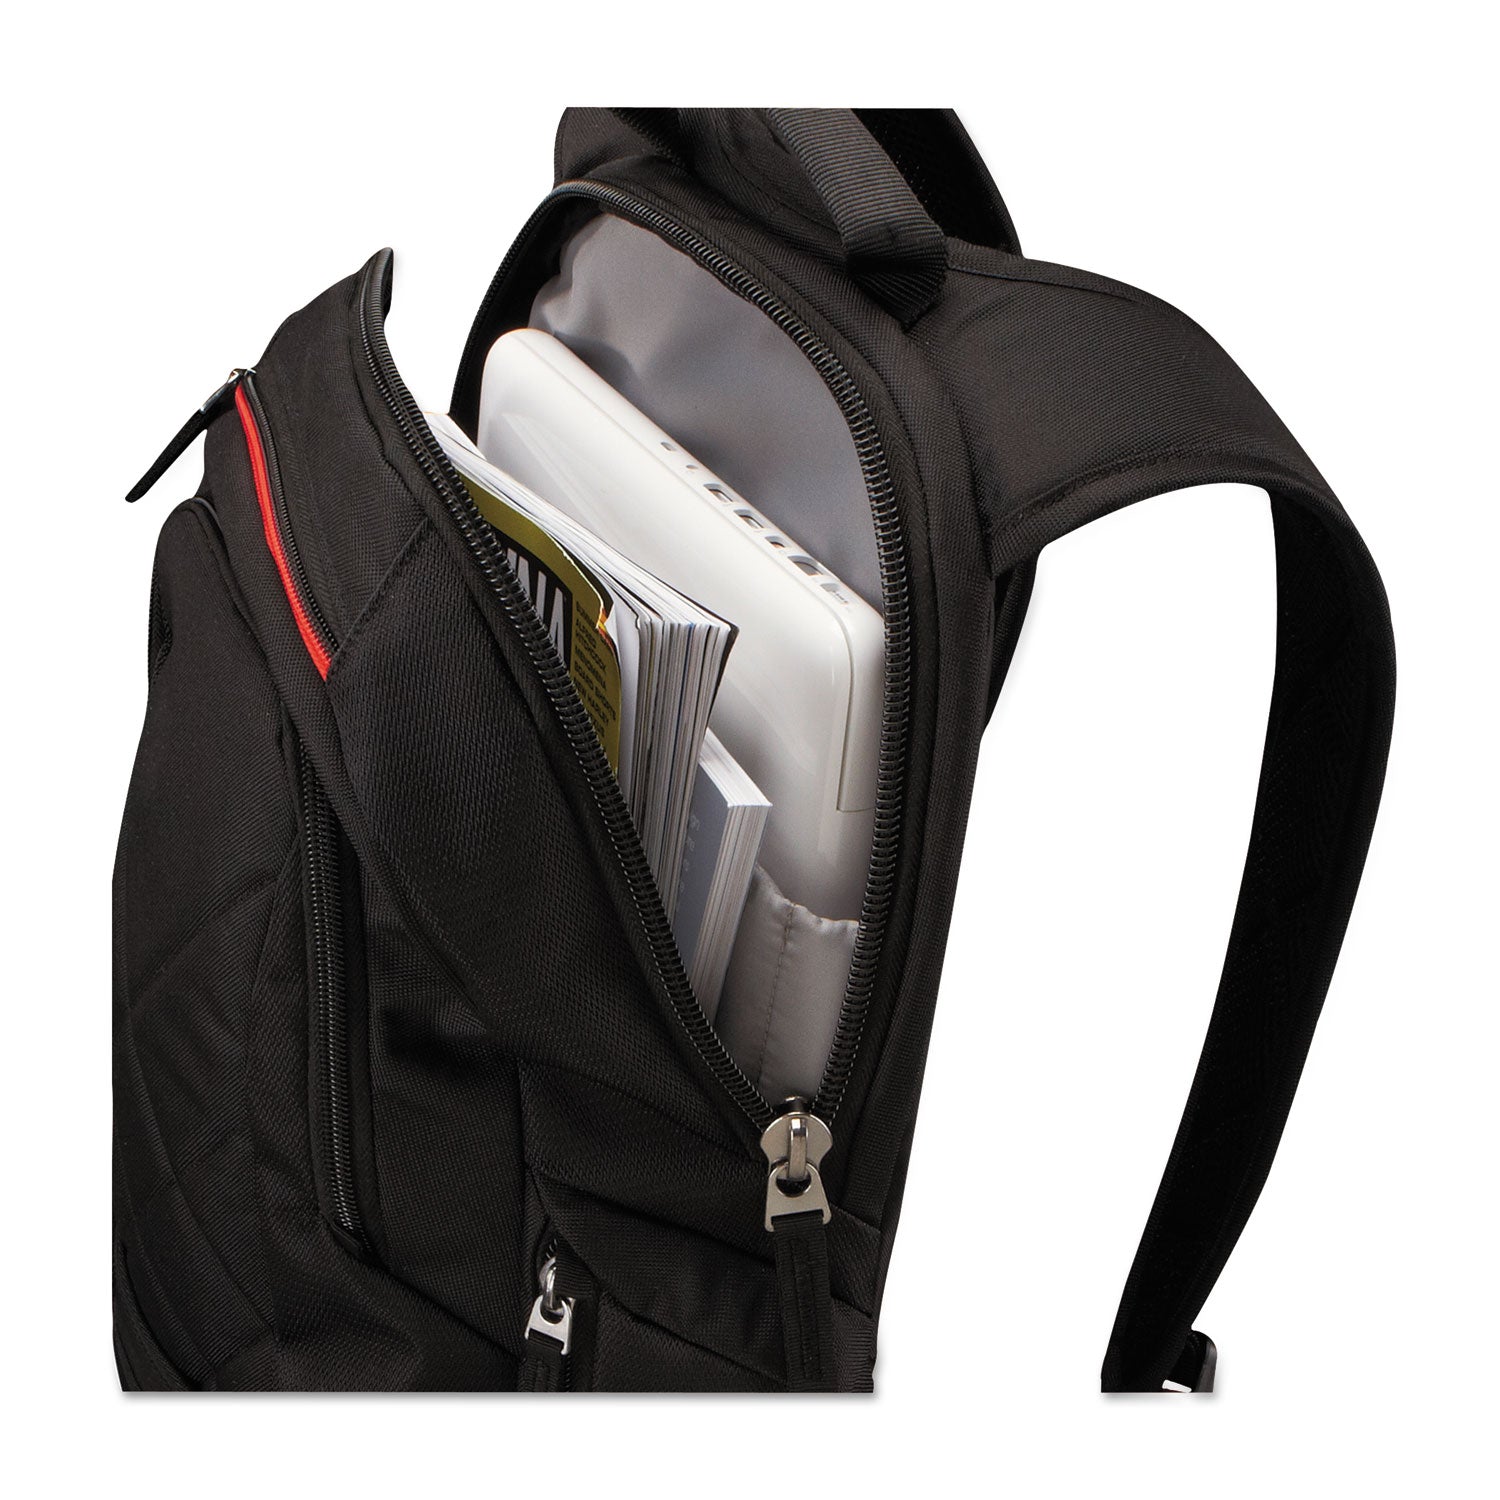 diamond-backpack-fits-devices-up-to-141-polyester-63-x-134-x-173-black_clg3201265 - 2